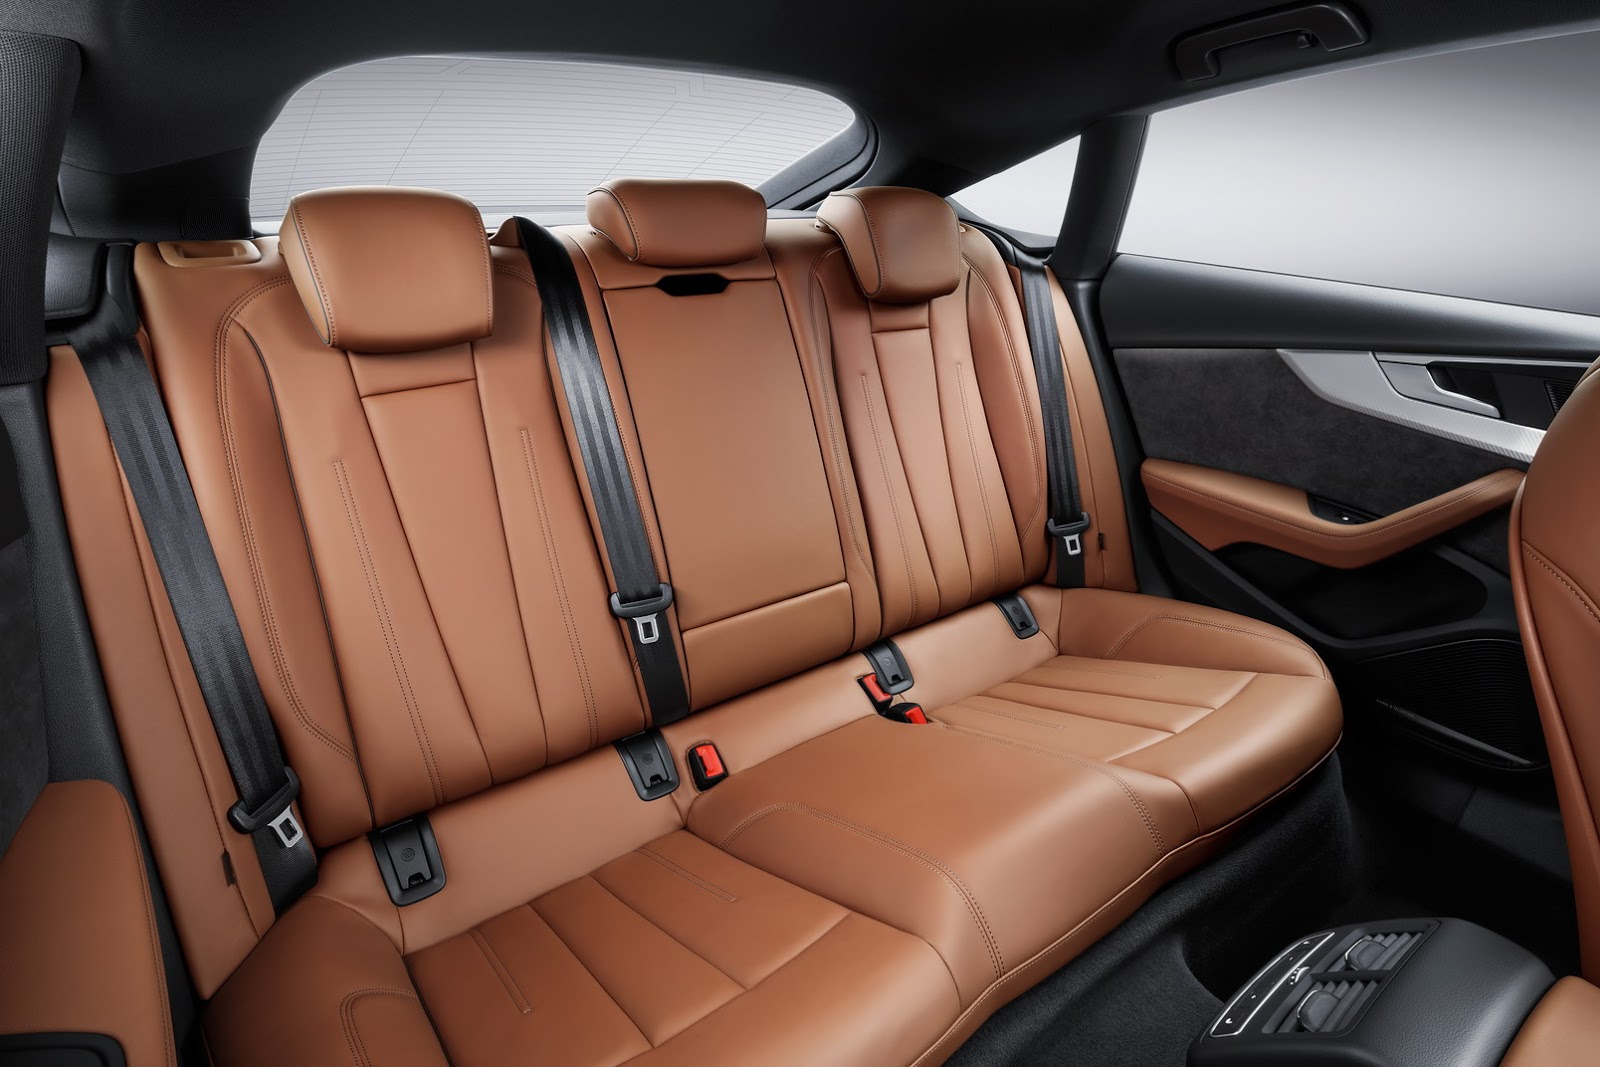 Inside the cabin Audi A5 and S5 Sportback